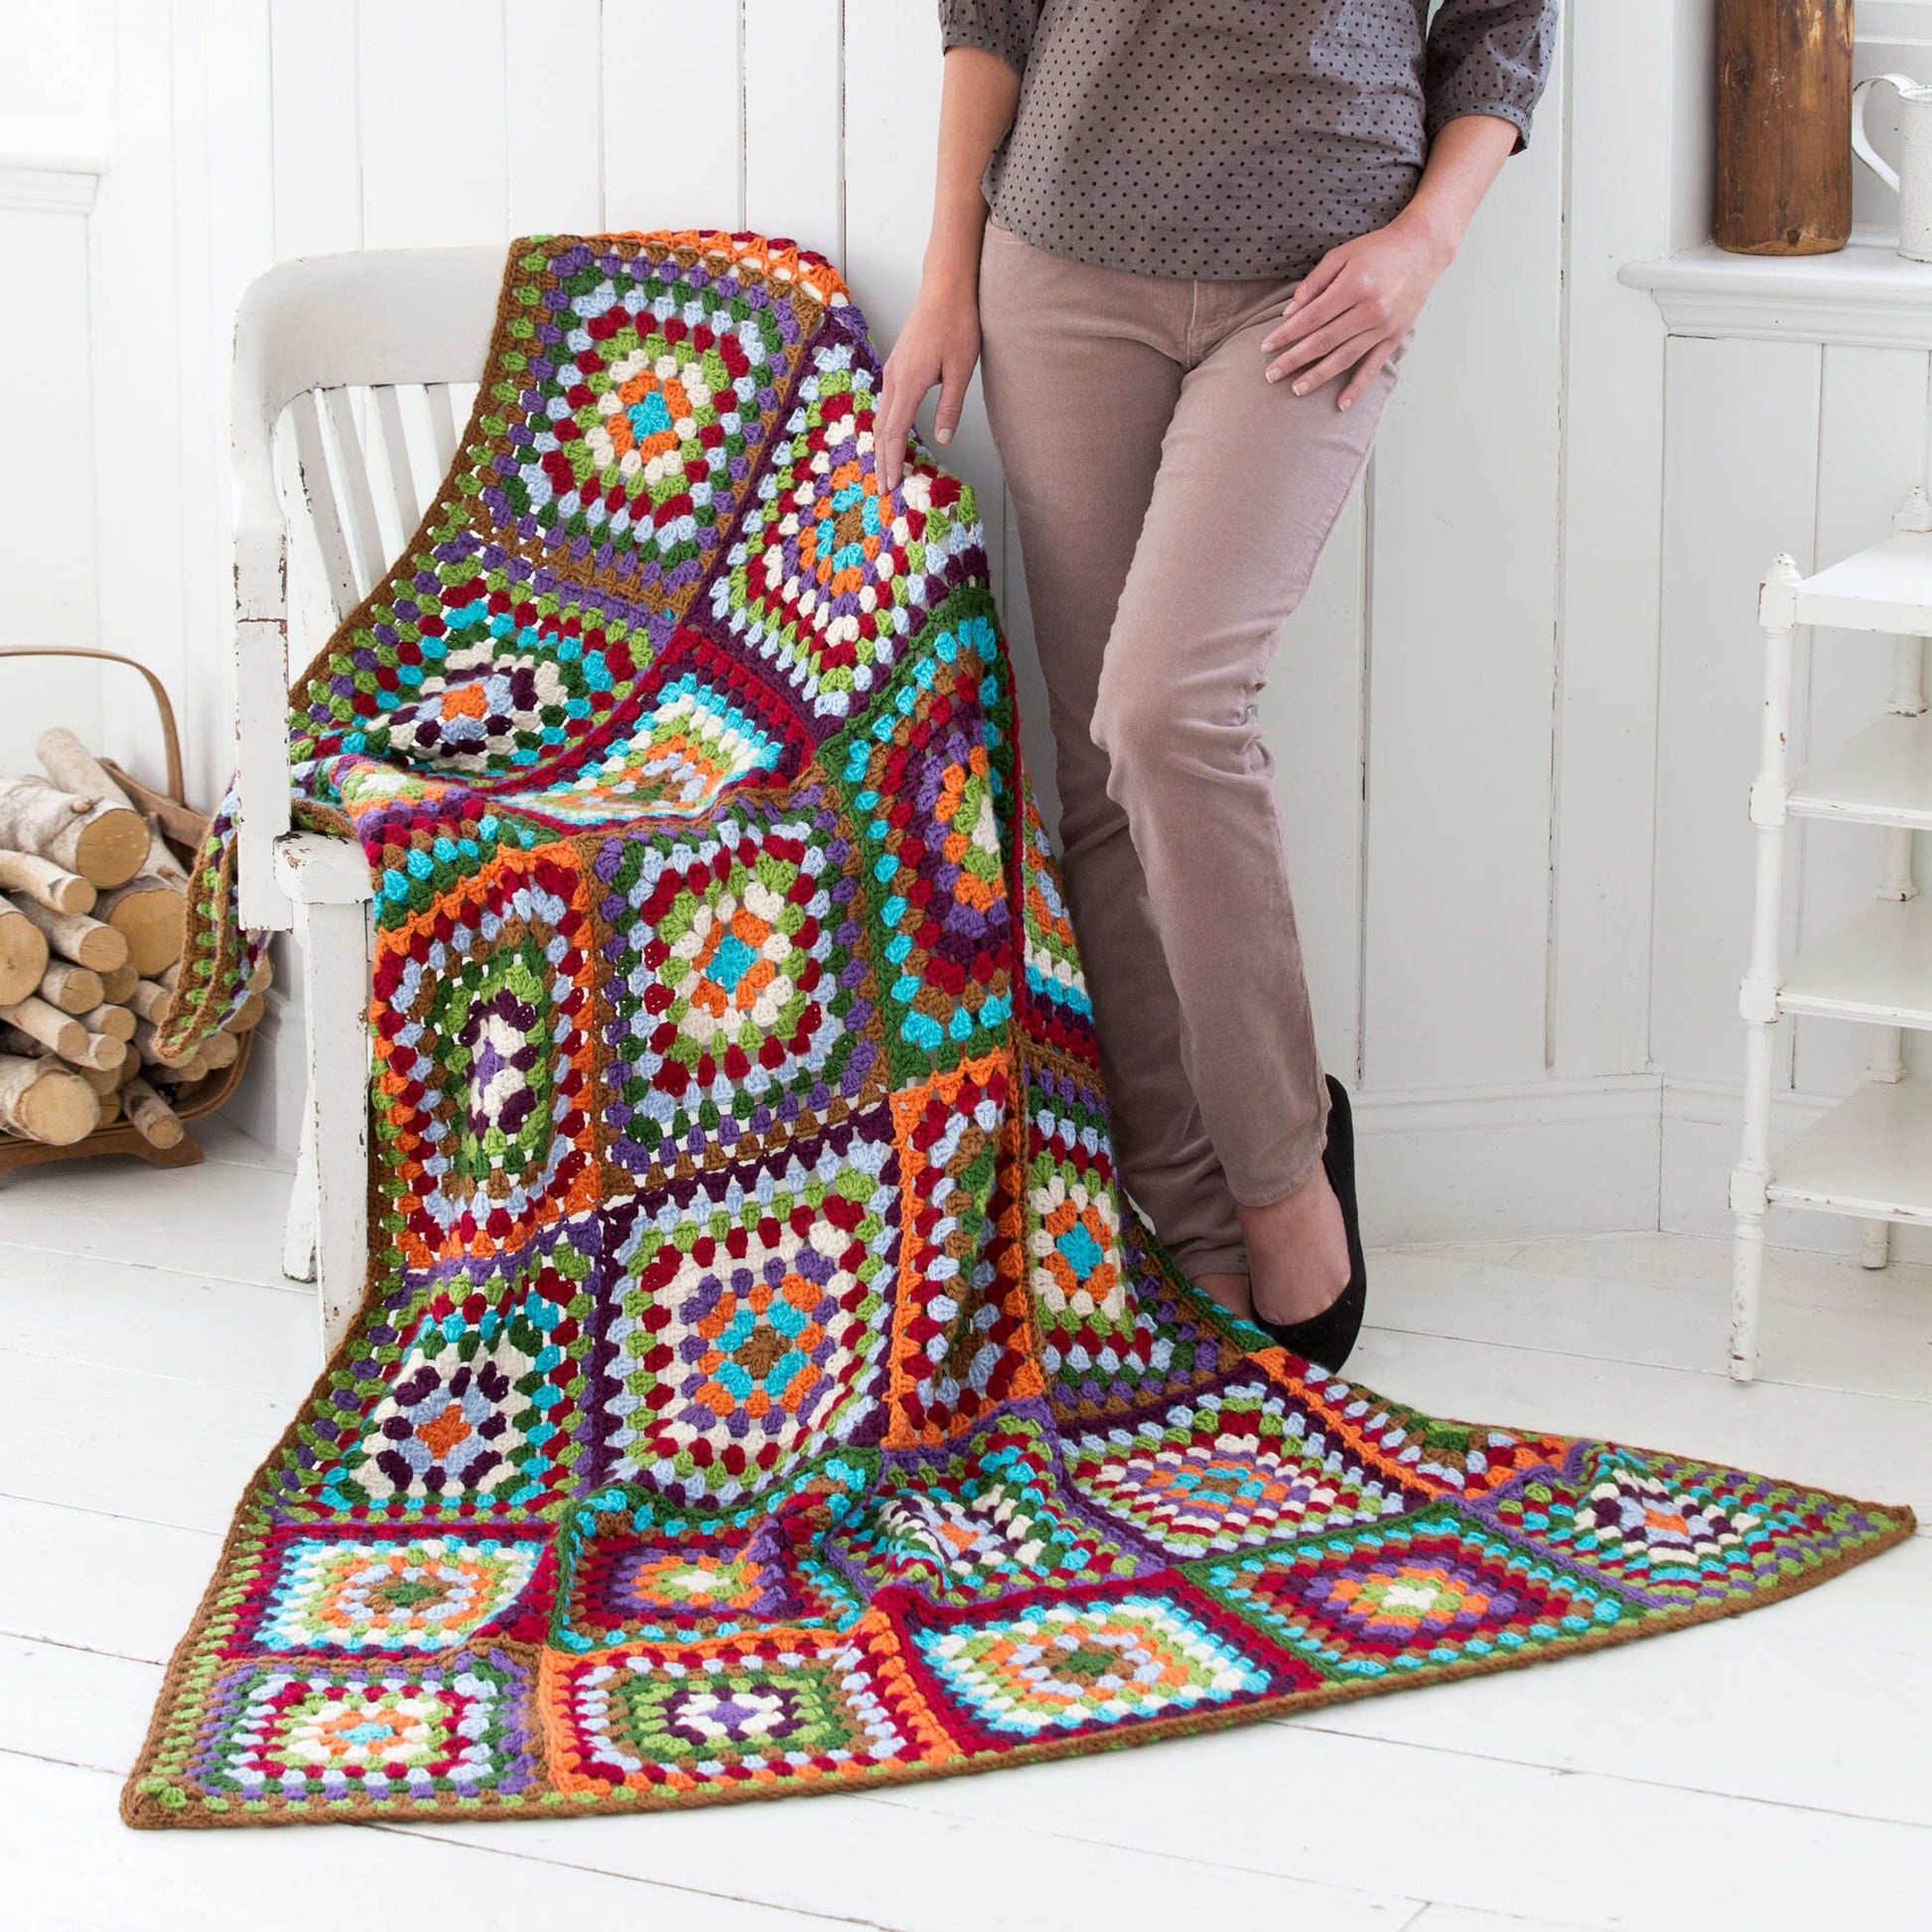 Free Red Heart Granny's Classic Throw Crochet Pattern